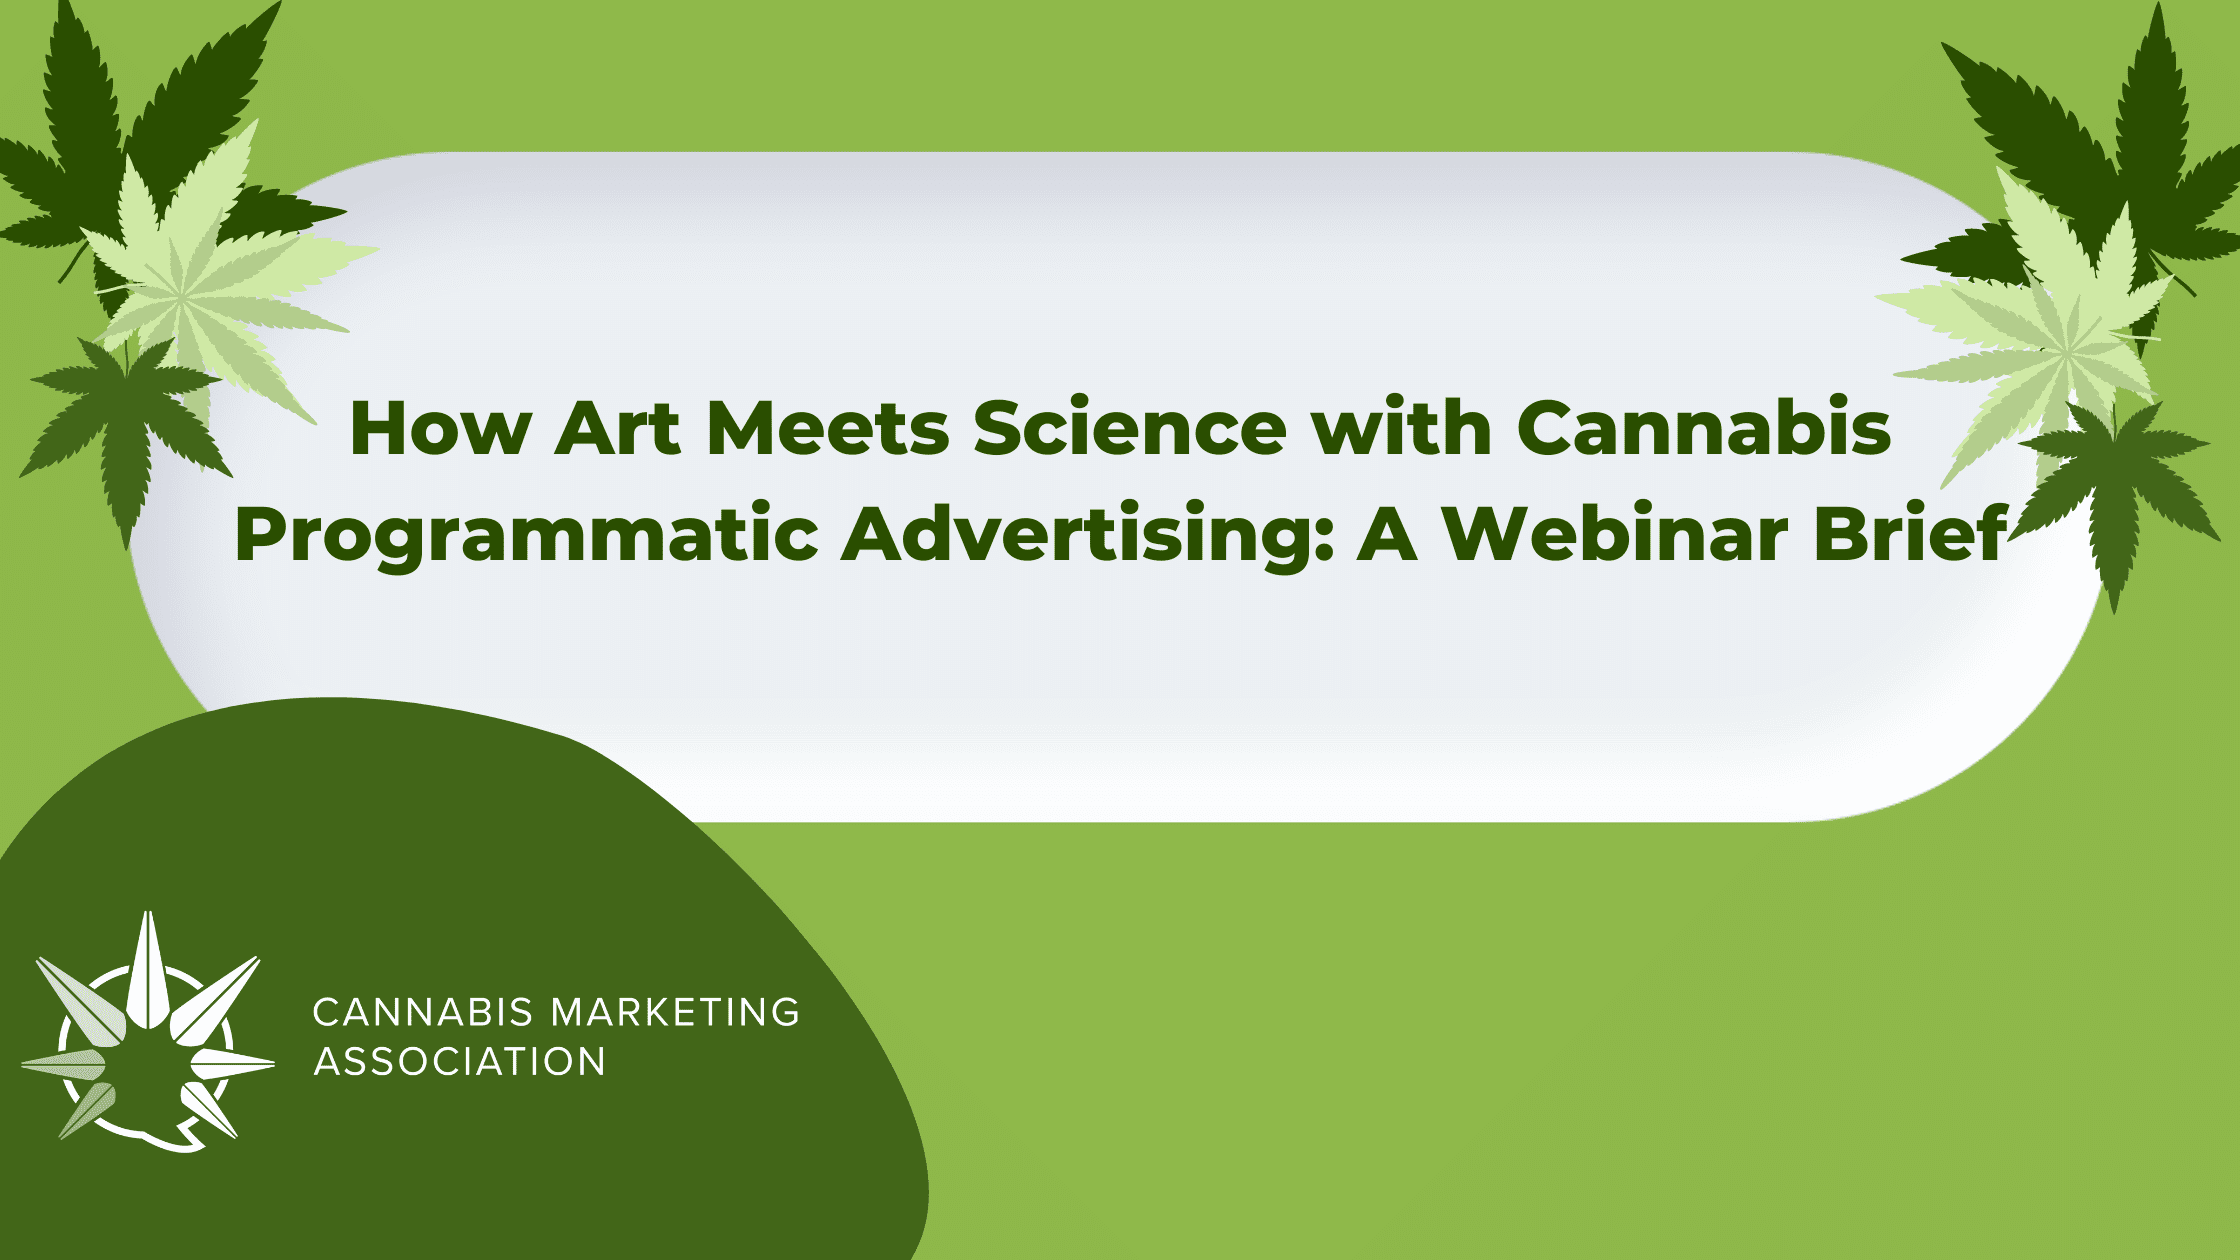 How Art Meets Science with Cannabis Programmatic Advertising: A Webinar Brief